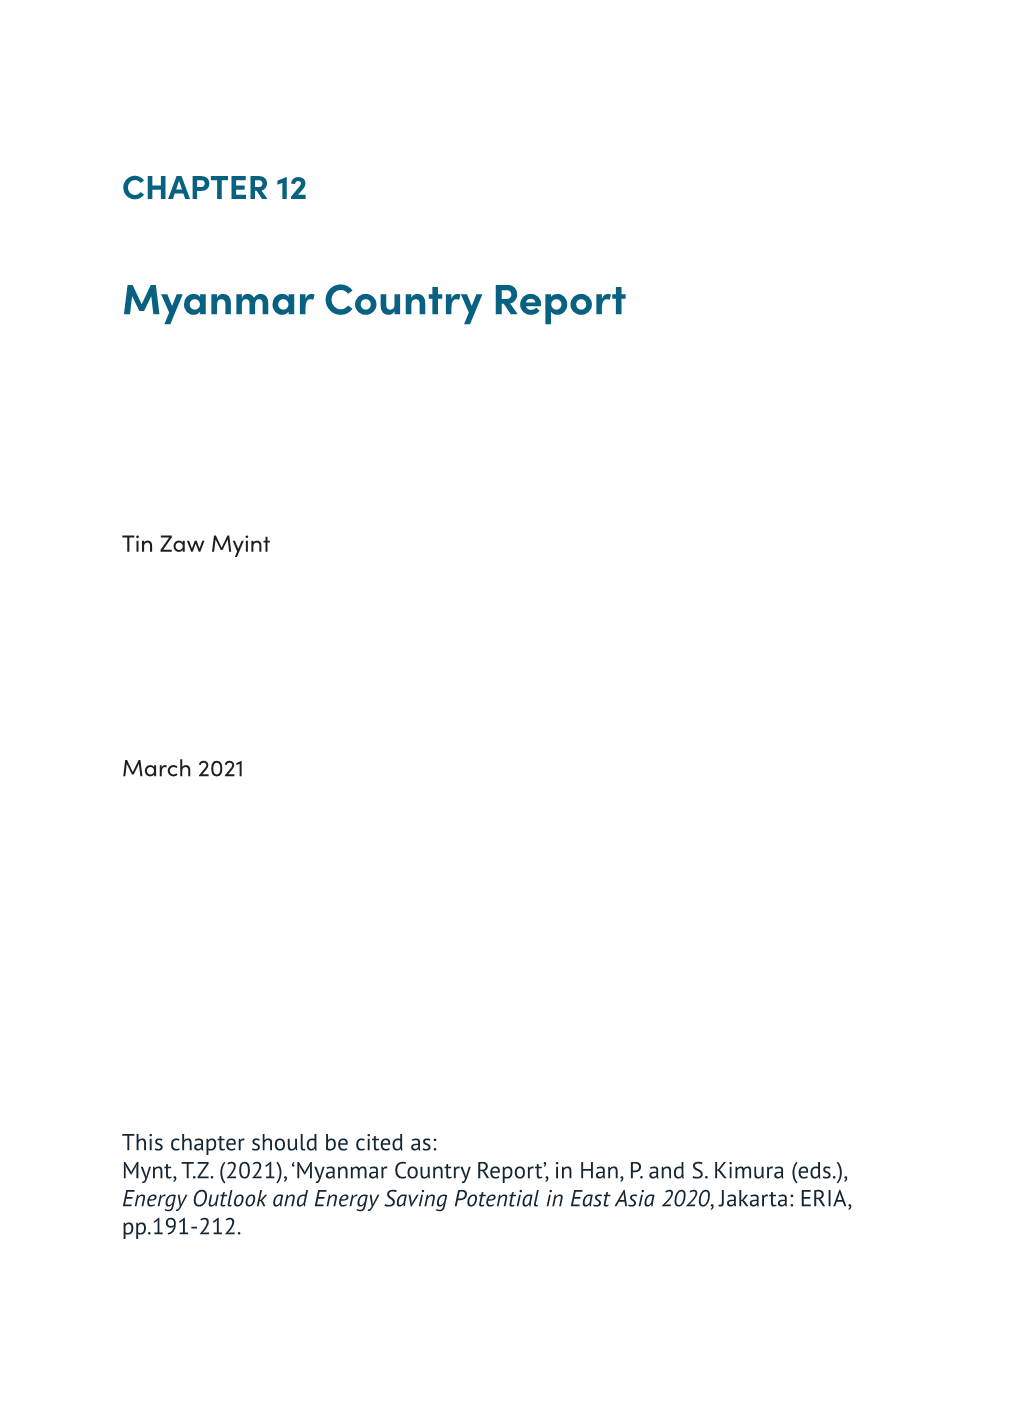 Chapter 12. Myanmar Country Report